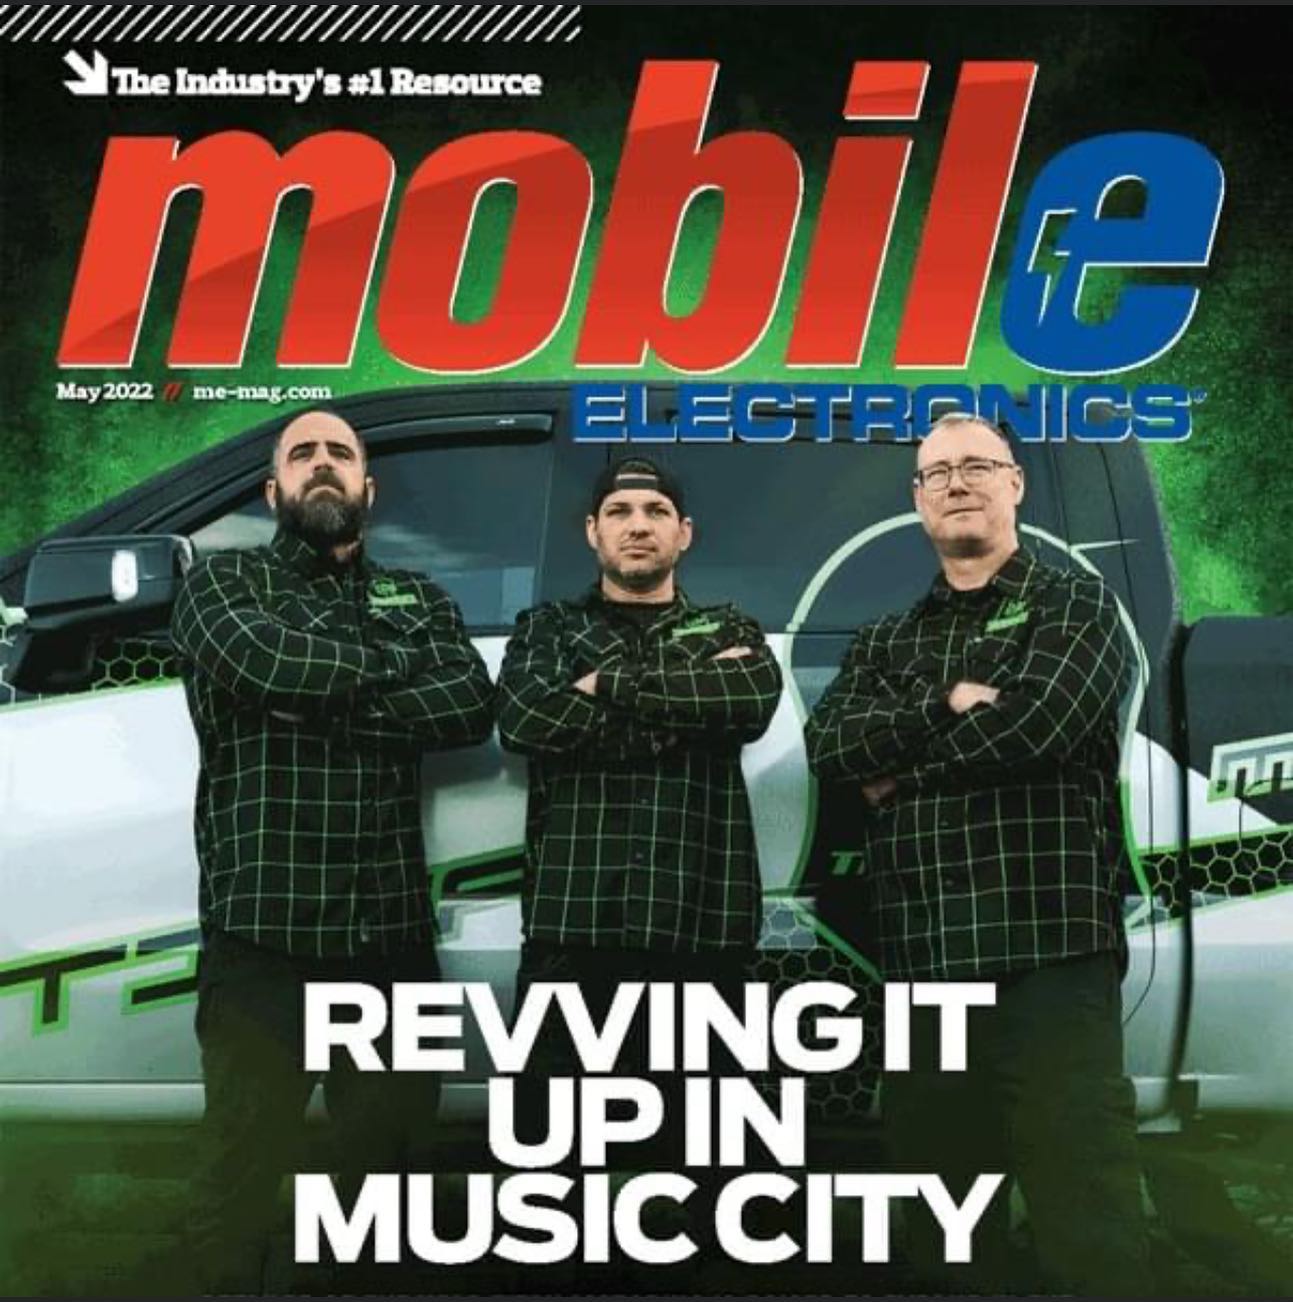 LINK IN BIO - Check out our cover models in the latest @mobile_electronics_magazine issue!
🥇 Retailer of the Year 🥇 
.
.
.
#mobileelectronicsmagazine #mearetaileroftheyear #awardwinning #kfest #knowledgefest #teamtitan #12vinstaller #12v #caraudio #mobileelectronics